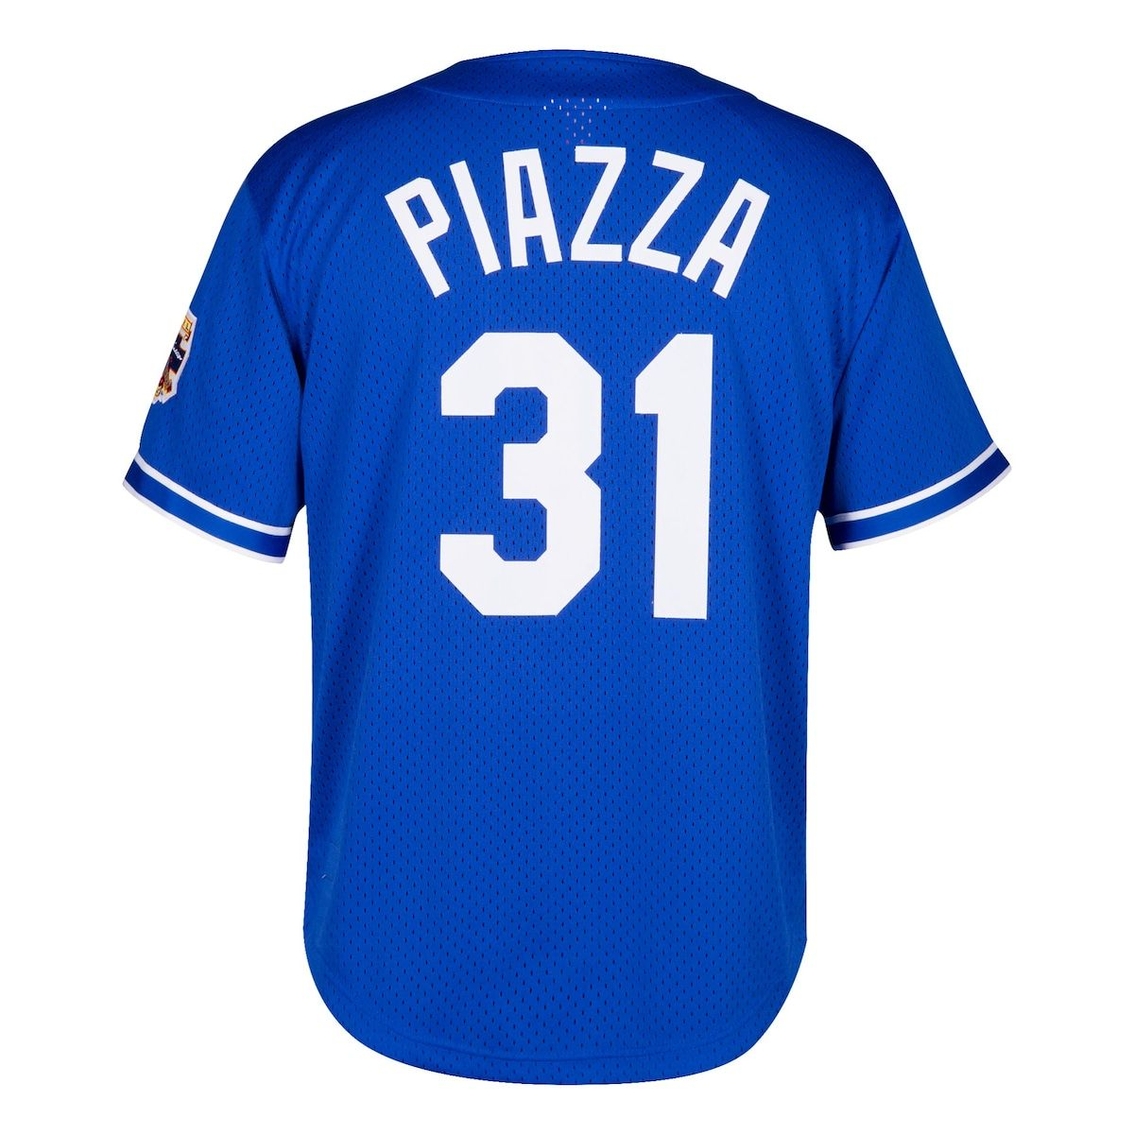 Mitchell & Ness Men's Mike Piazza Royal Los Angeles Dodgers Cooperstown Collection Mesh Batting Practice Button-Up Jersey - Image 4 of 4